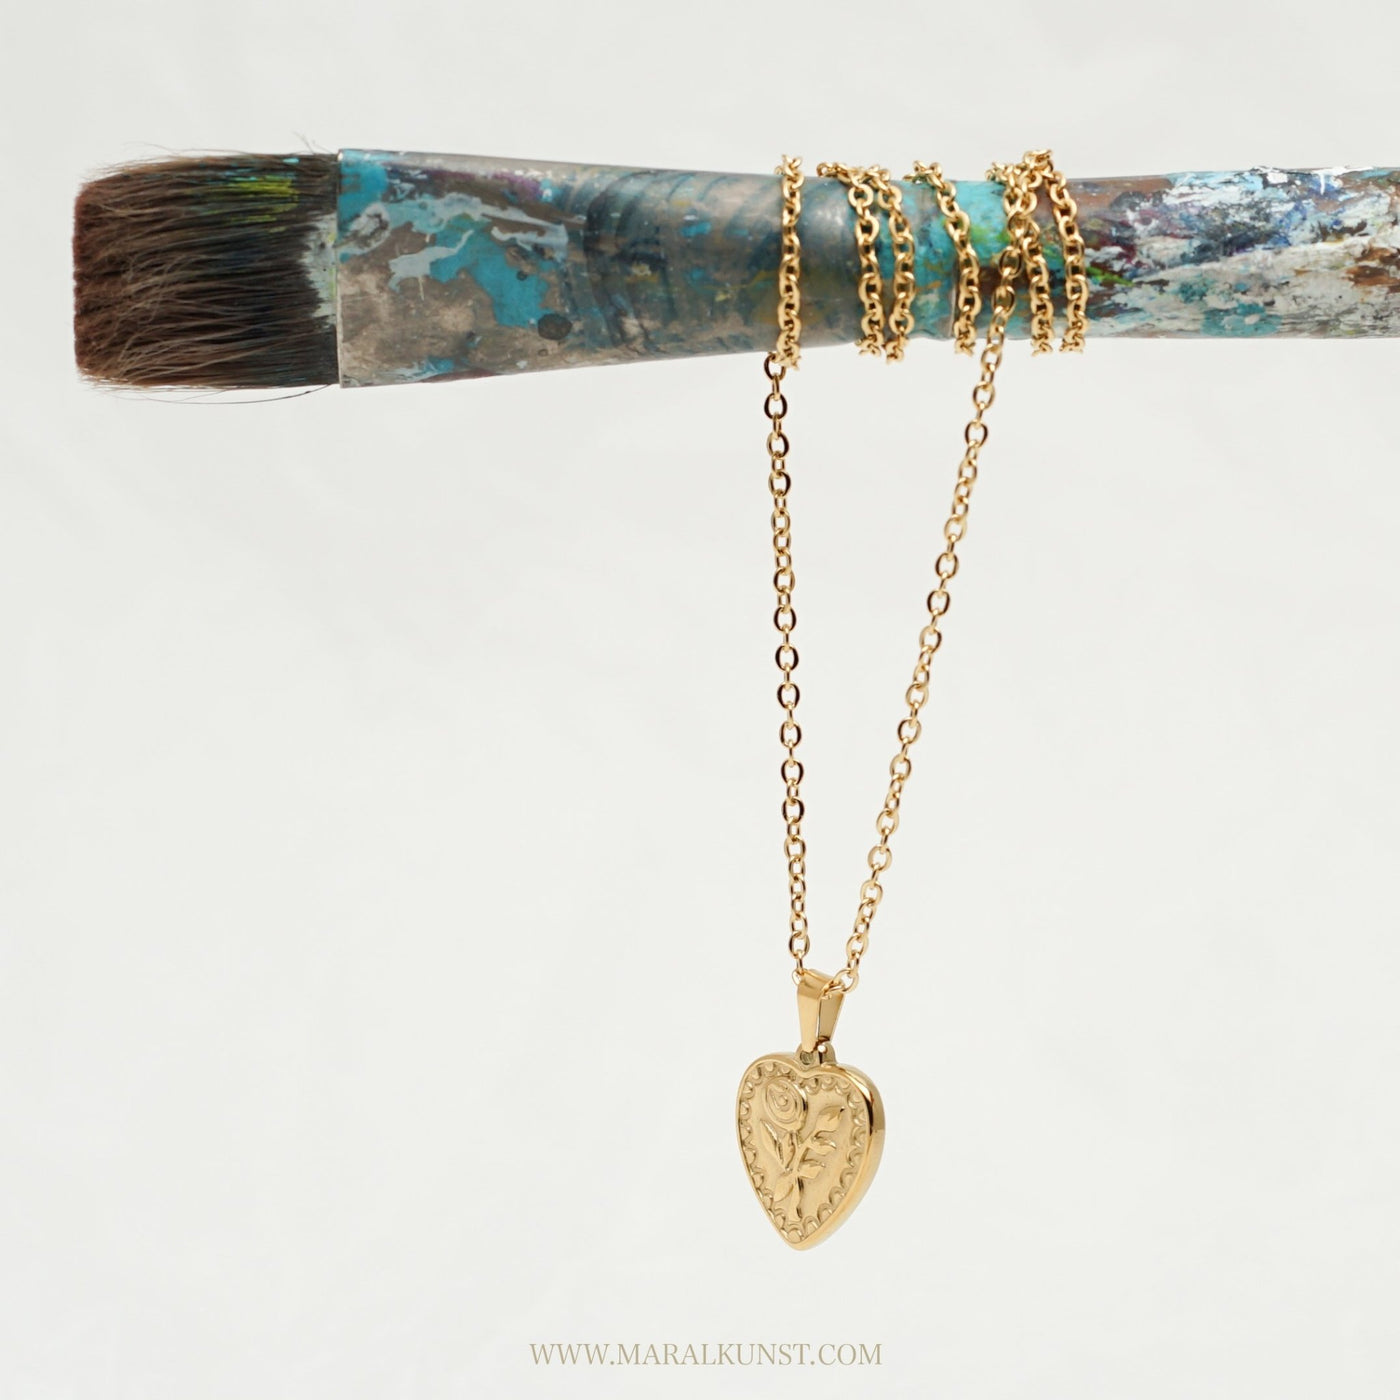 Love At First Sight Flower Necklace - Maral Kunst Jewelry